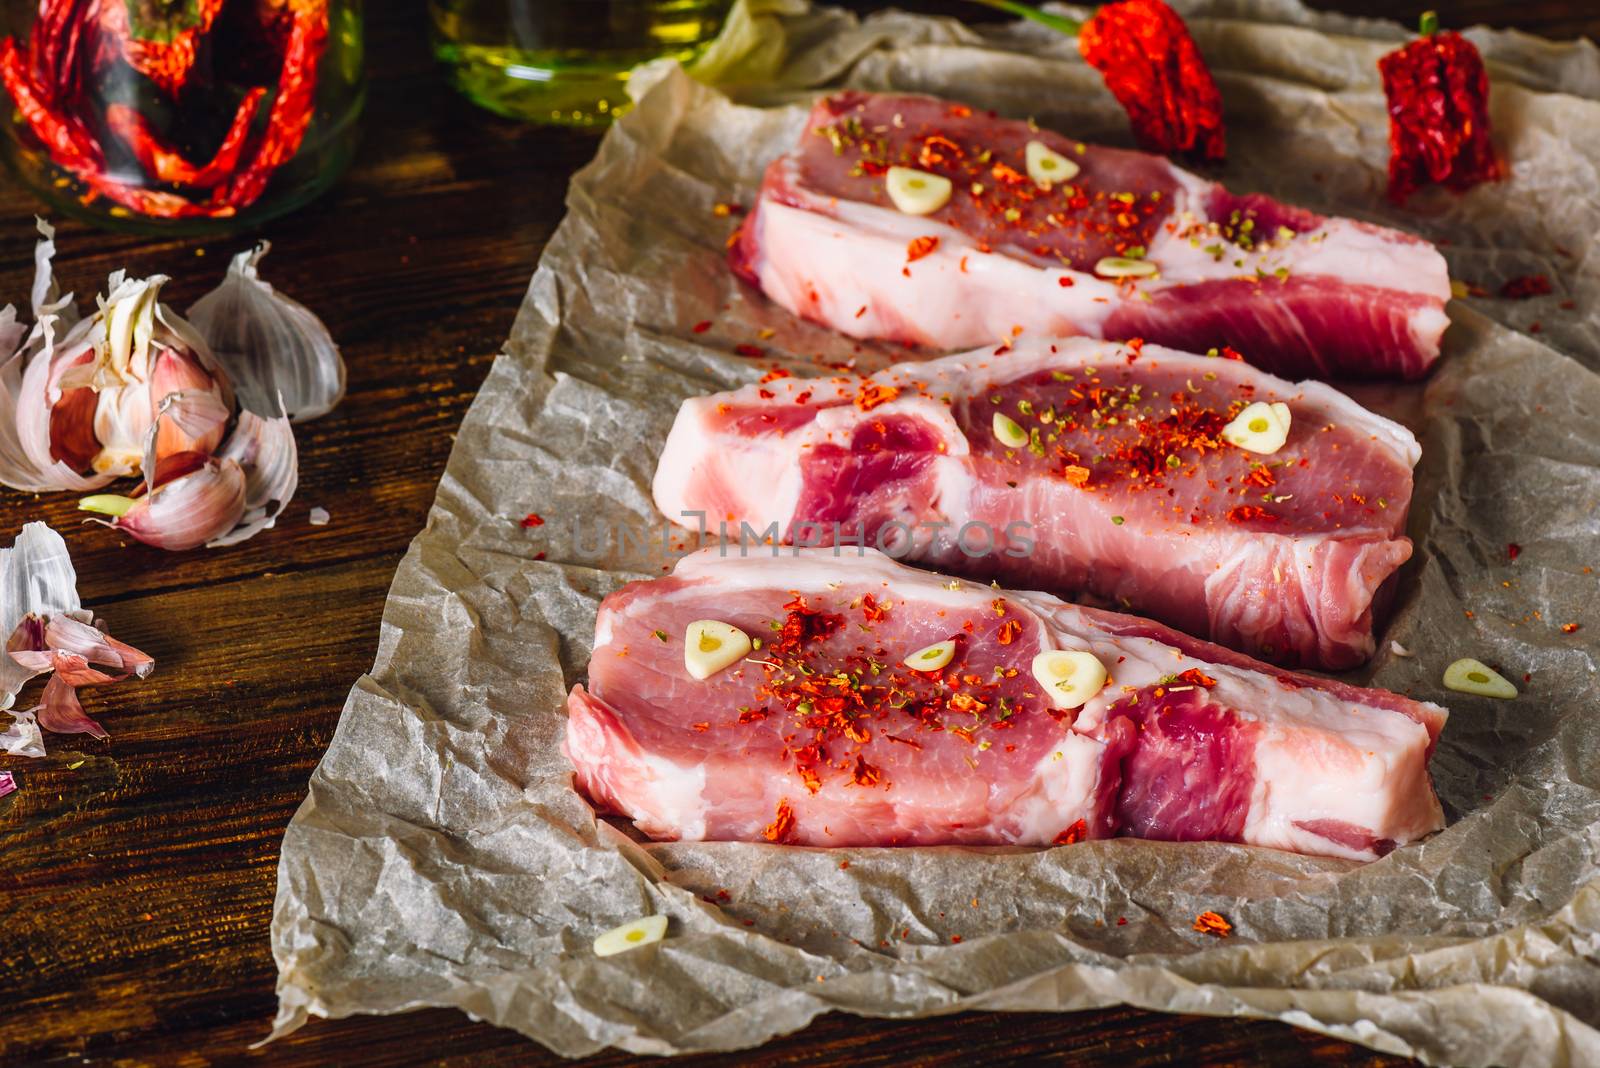 Raw pork steaks with chili pepper and garlic